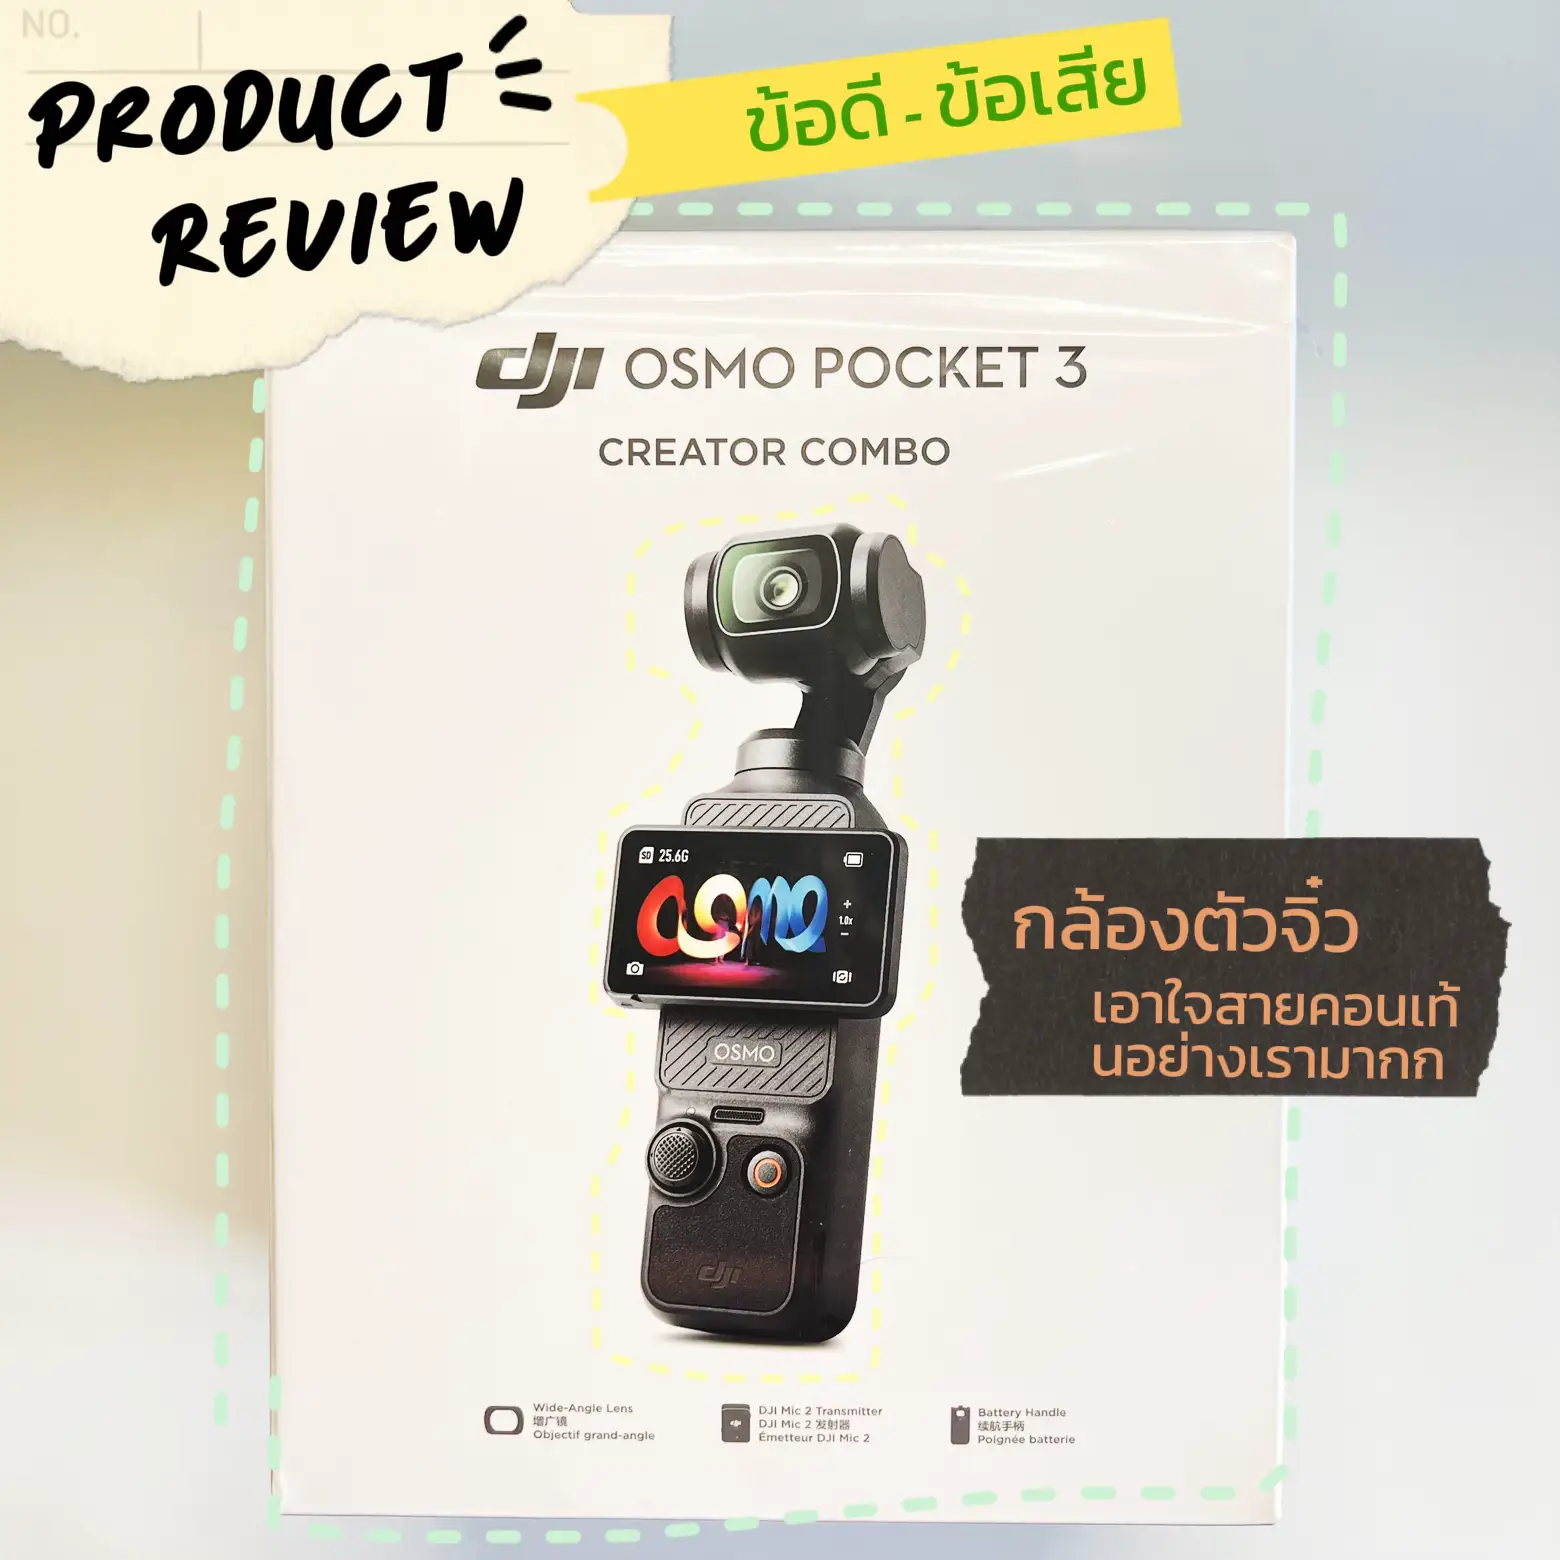 The Osmo Pocket 3 creator combo comes with the all-new DJI Mic 2  transmitter - giving you extremely clean audio that's perfect for your…